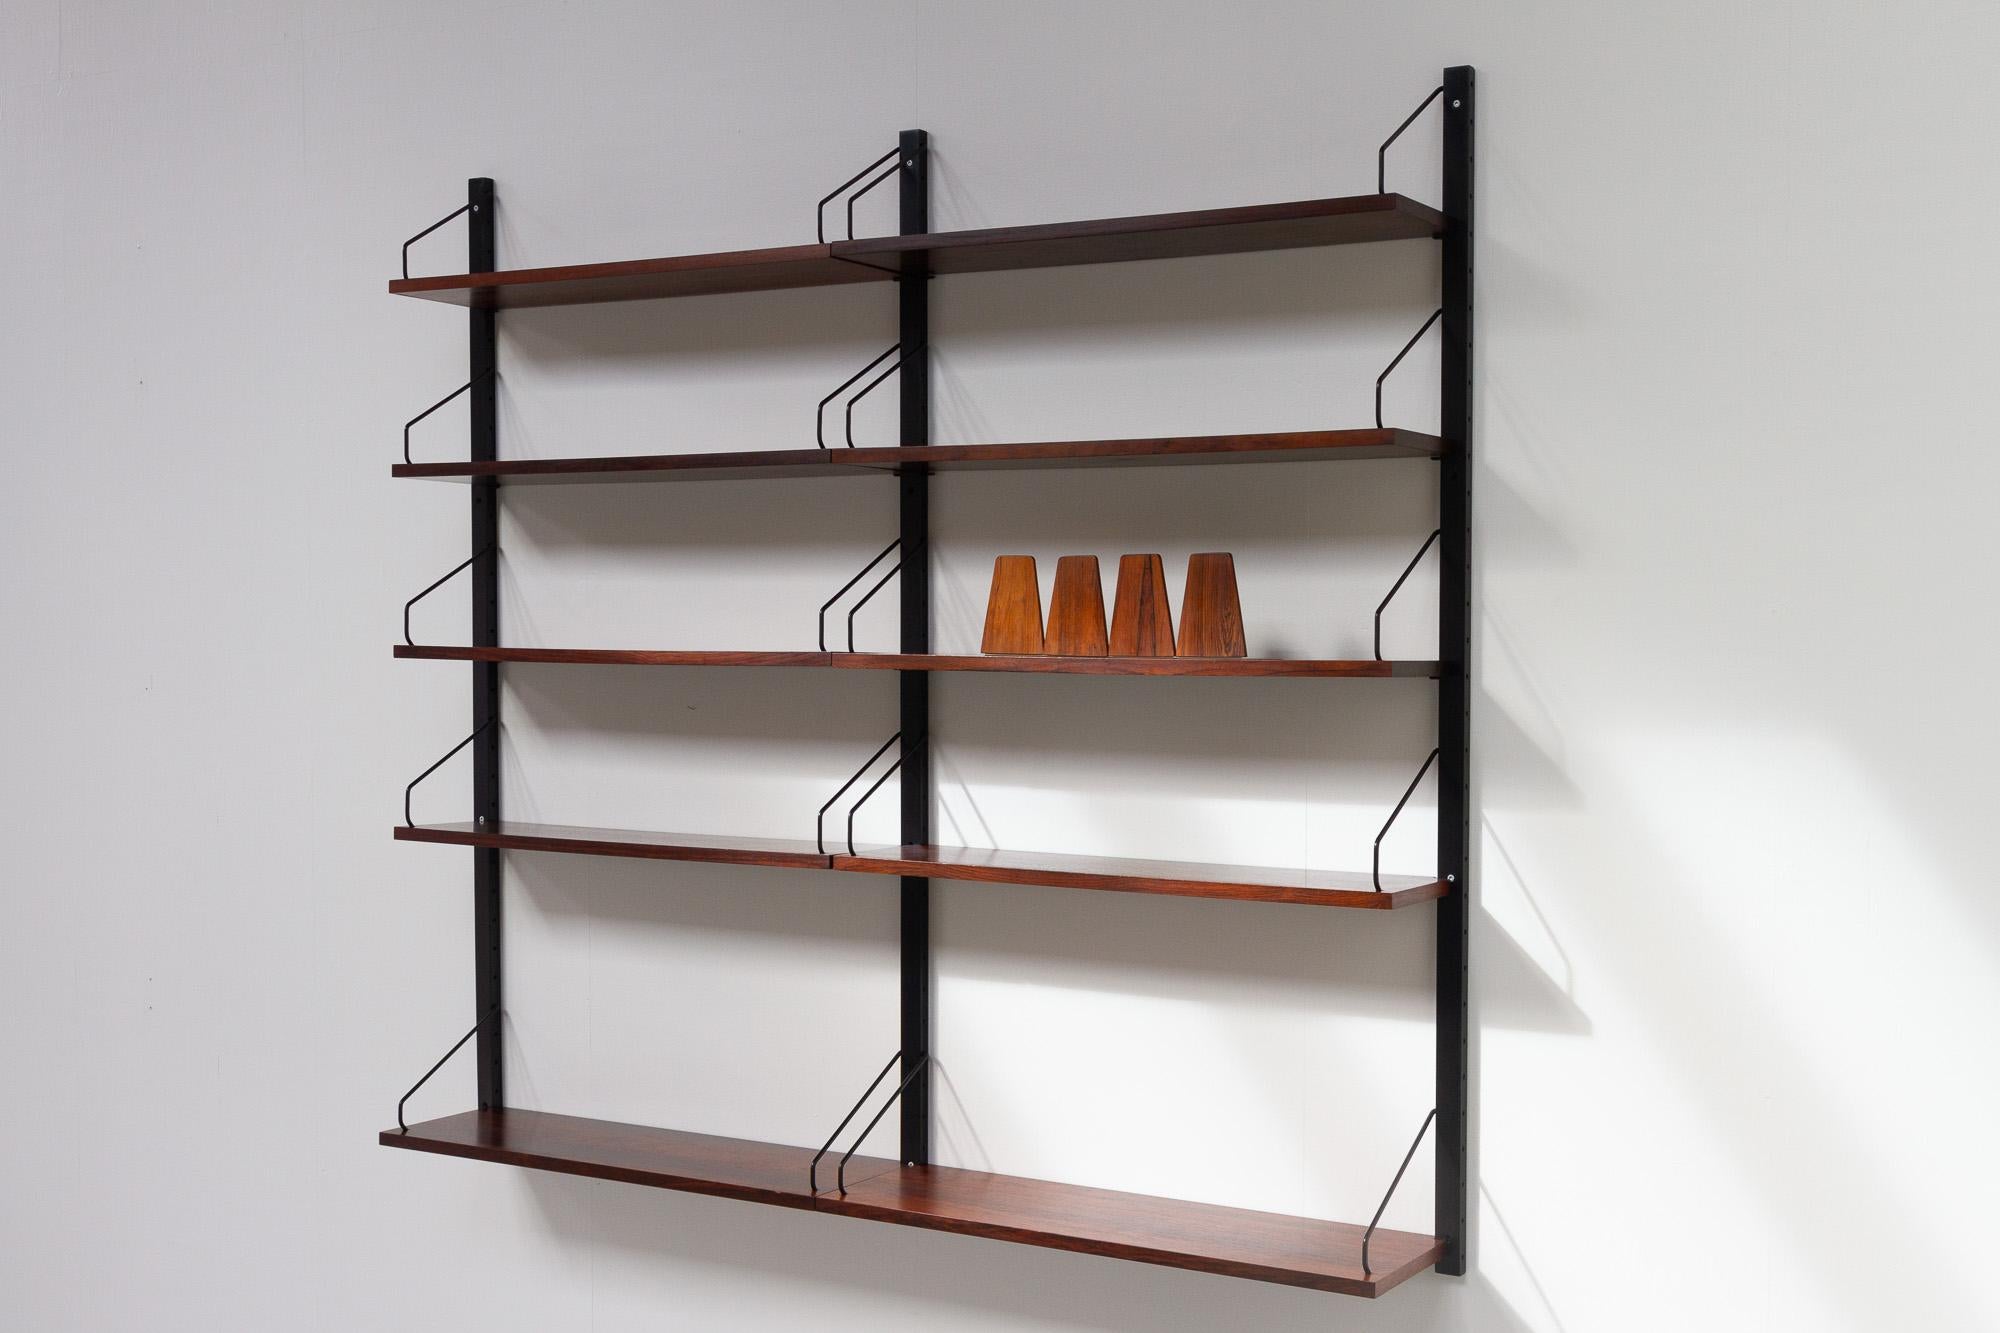 Vintage Danish rosewood wall unit by Poul Cadovius for Cado, 1960s.

Mid-Century Modern 2 bay shelving system model Royal. This is a original vintage floating bookcase designed in 1948 by Danish architect Poul Cadovius. 
Cadovius had the